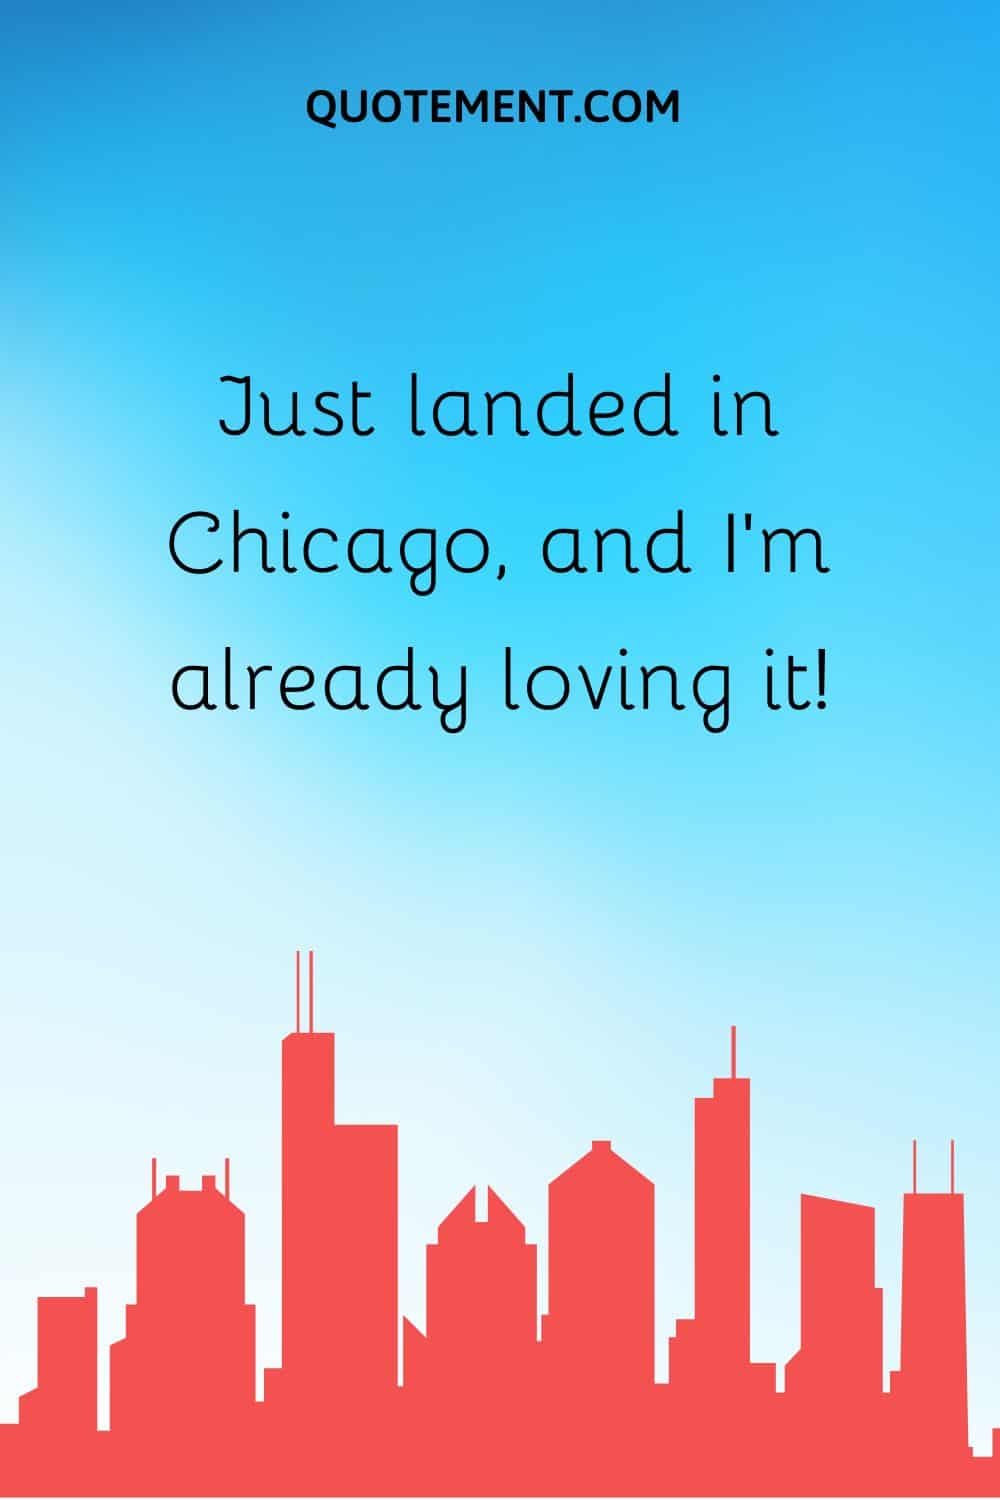 Just landed in Chicago, and I’m already loving it!